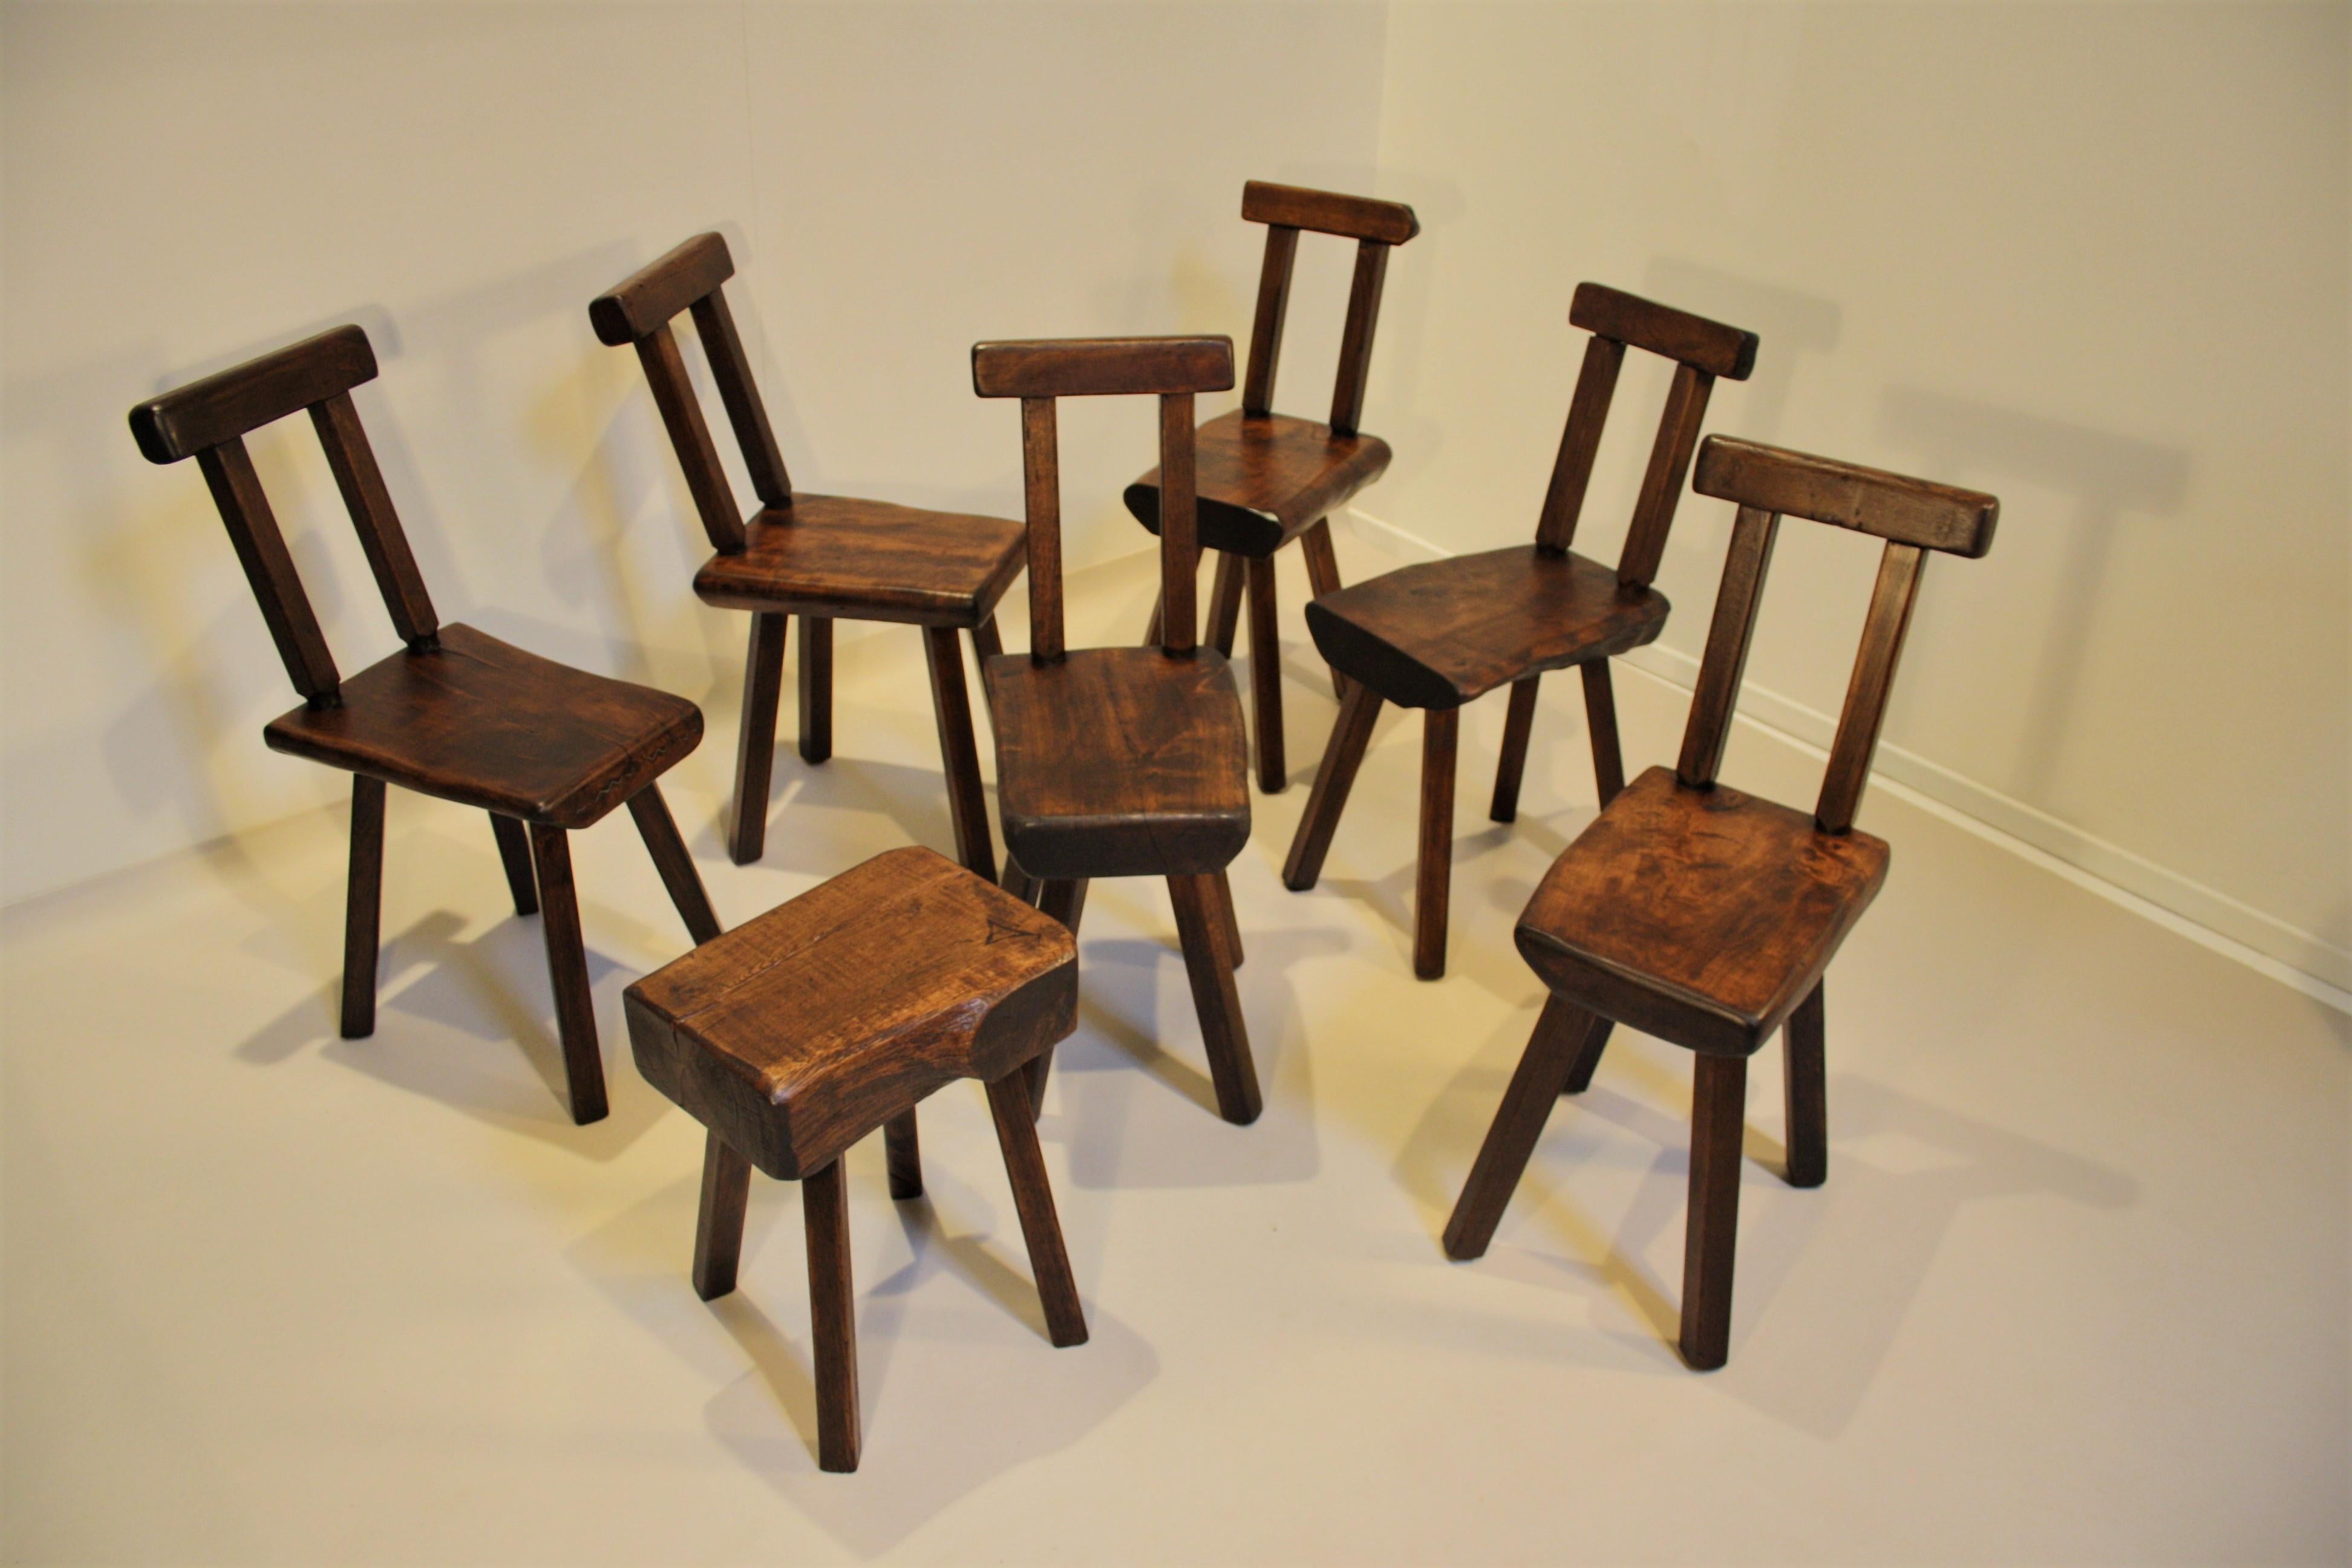 Six Belgian hand carved oak chairs and one stool made of solid oak with natural irregular edges.
The solid oakwood shows some knots and cracks, this gives the whole a very beautiful look.
At one of the chairs, a metal spiral was originally